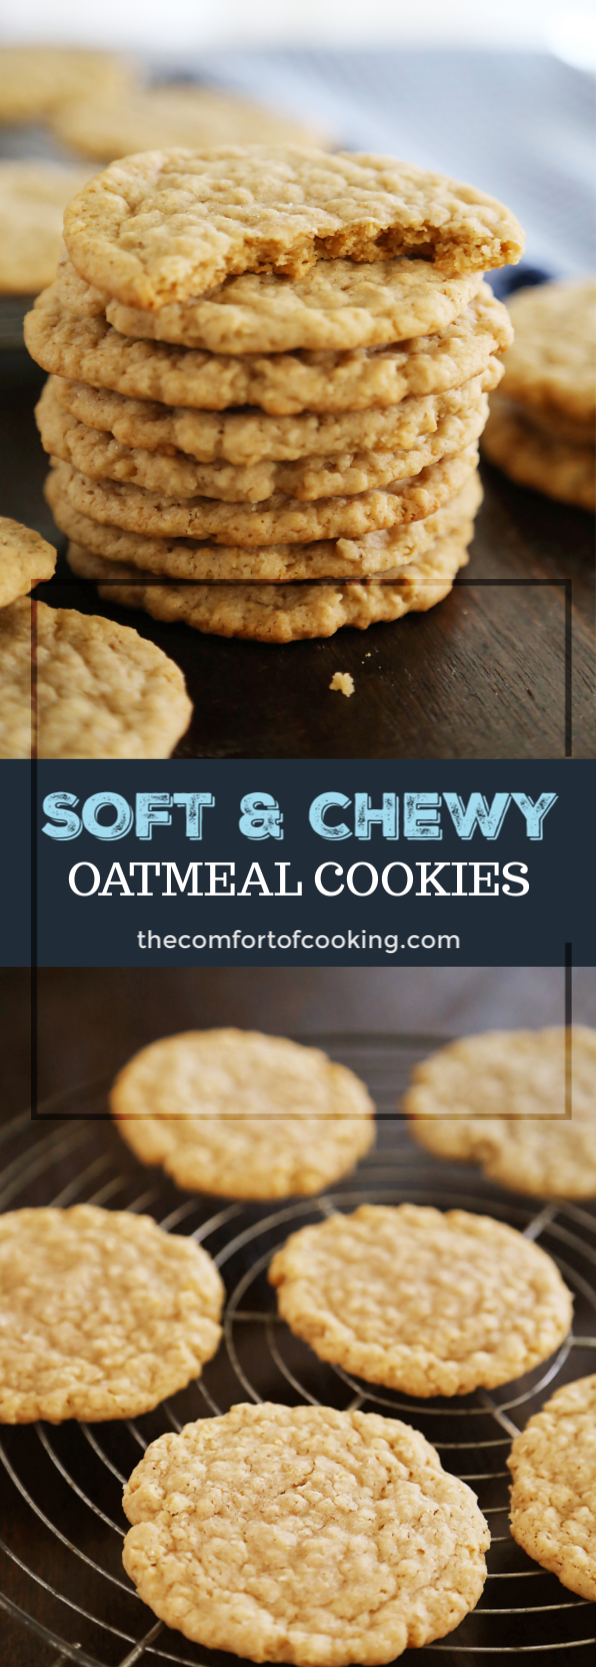 http://www.thecomfortofcooking.com/wp-content/uploads/2015/03/Soft-Chewy-Oatmeal-Cookies.png